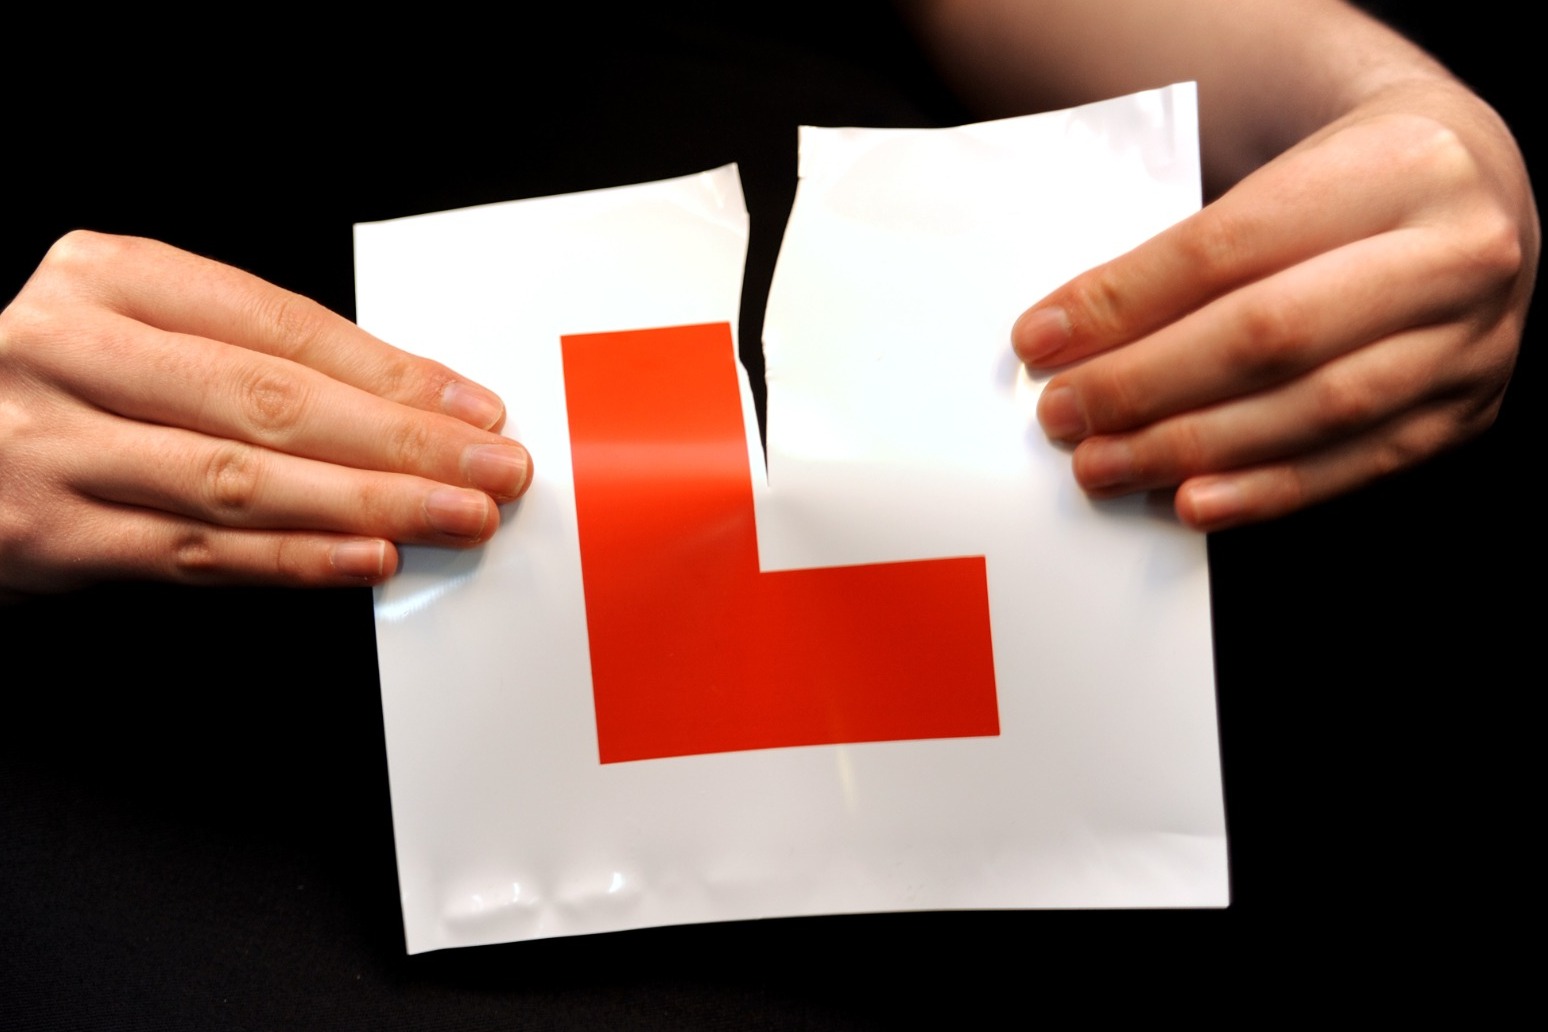 Retaking tests costing learner drivers £45.4 million each year 